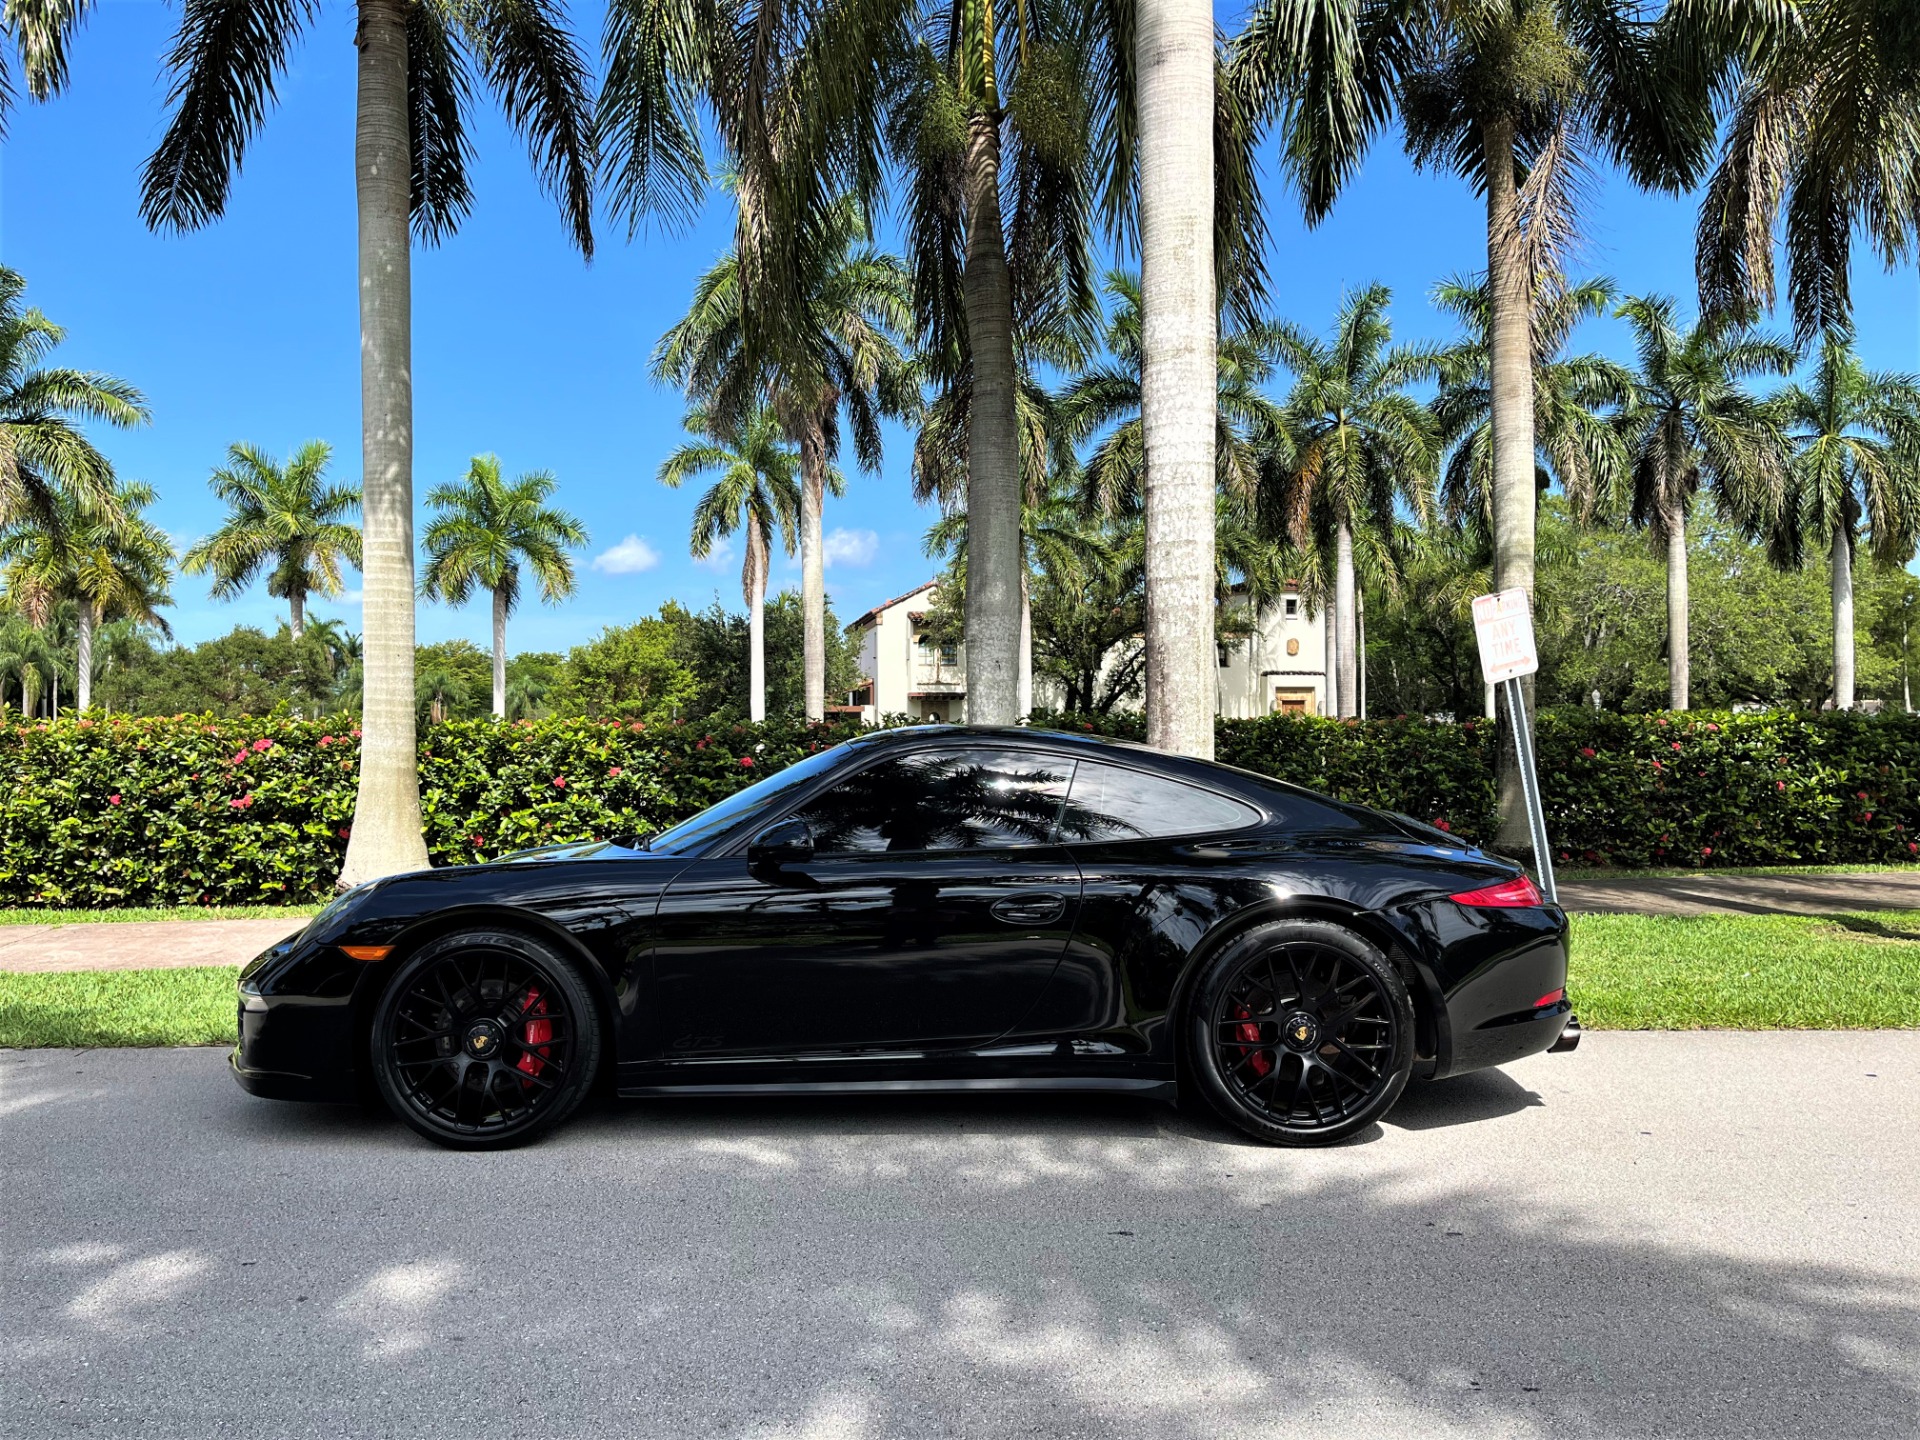 Used 2016 Porsche 911 Carrera 4 GTS for sale $134,850 at The Gables Sports Cars in Miami FL 33146 2